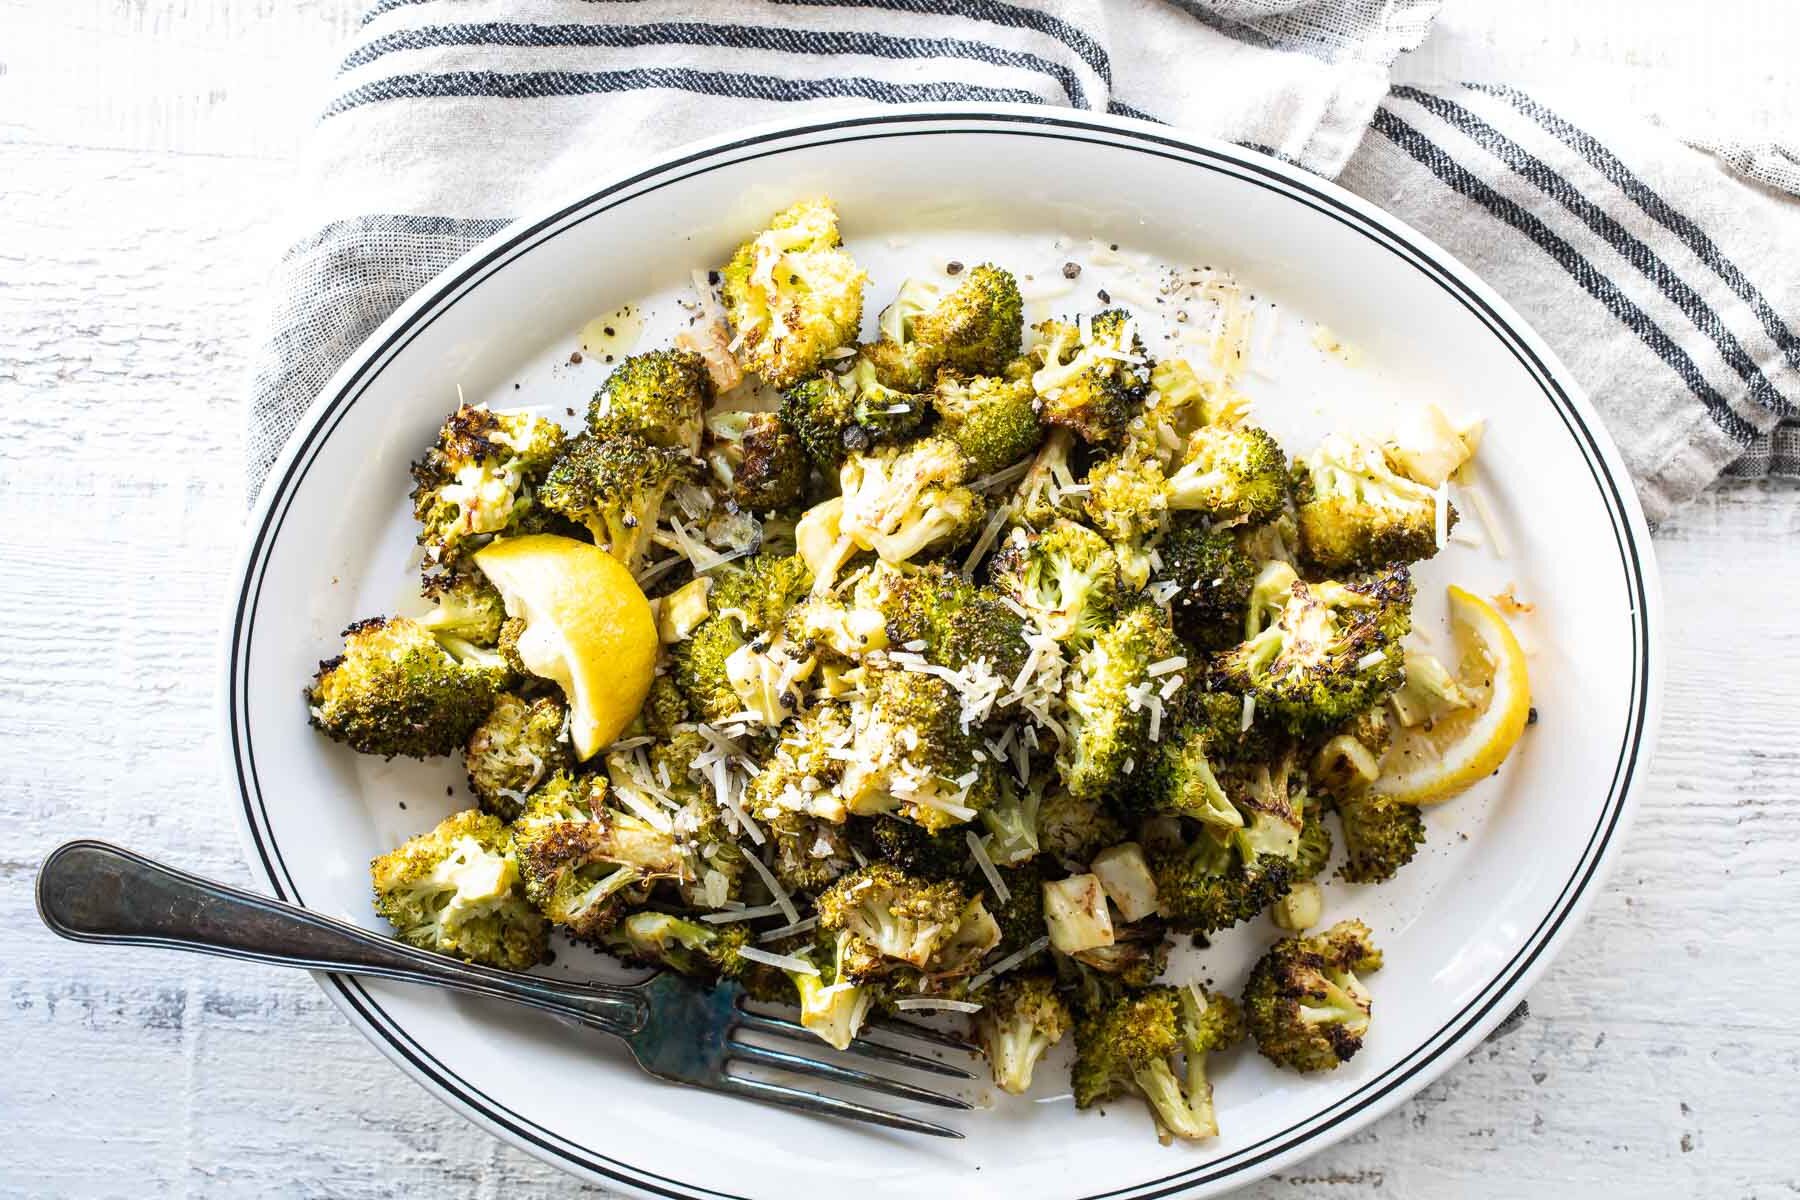 Roasted broccoli with lemon in a bowl.